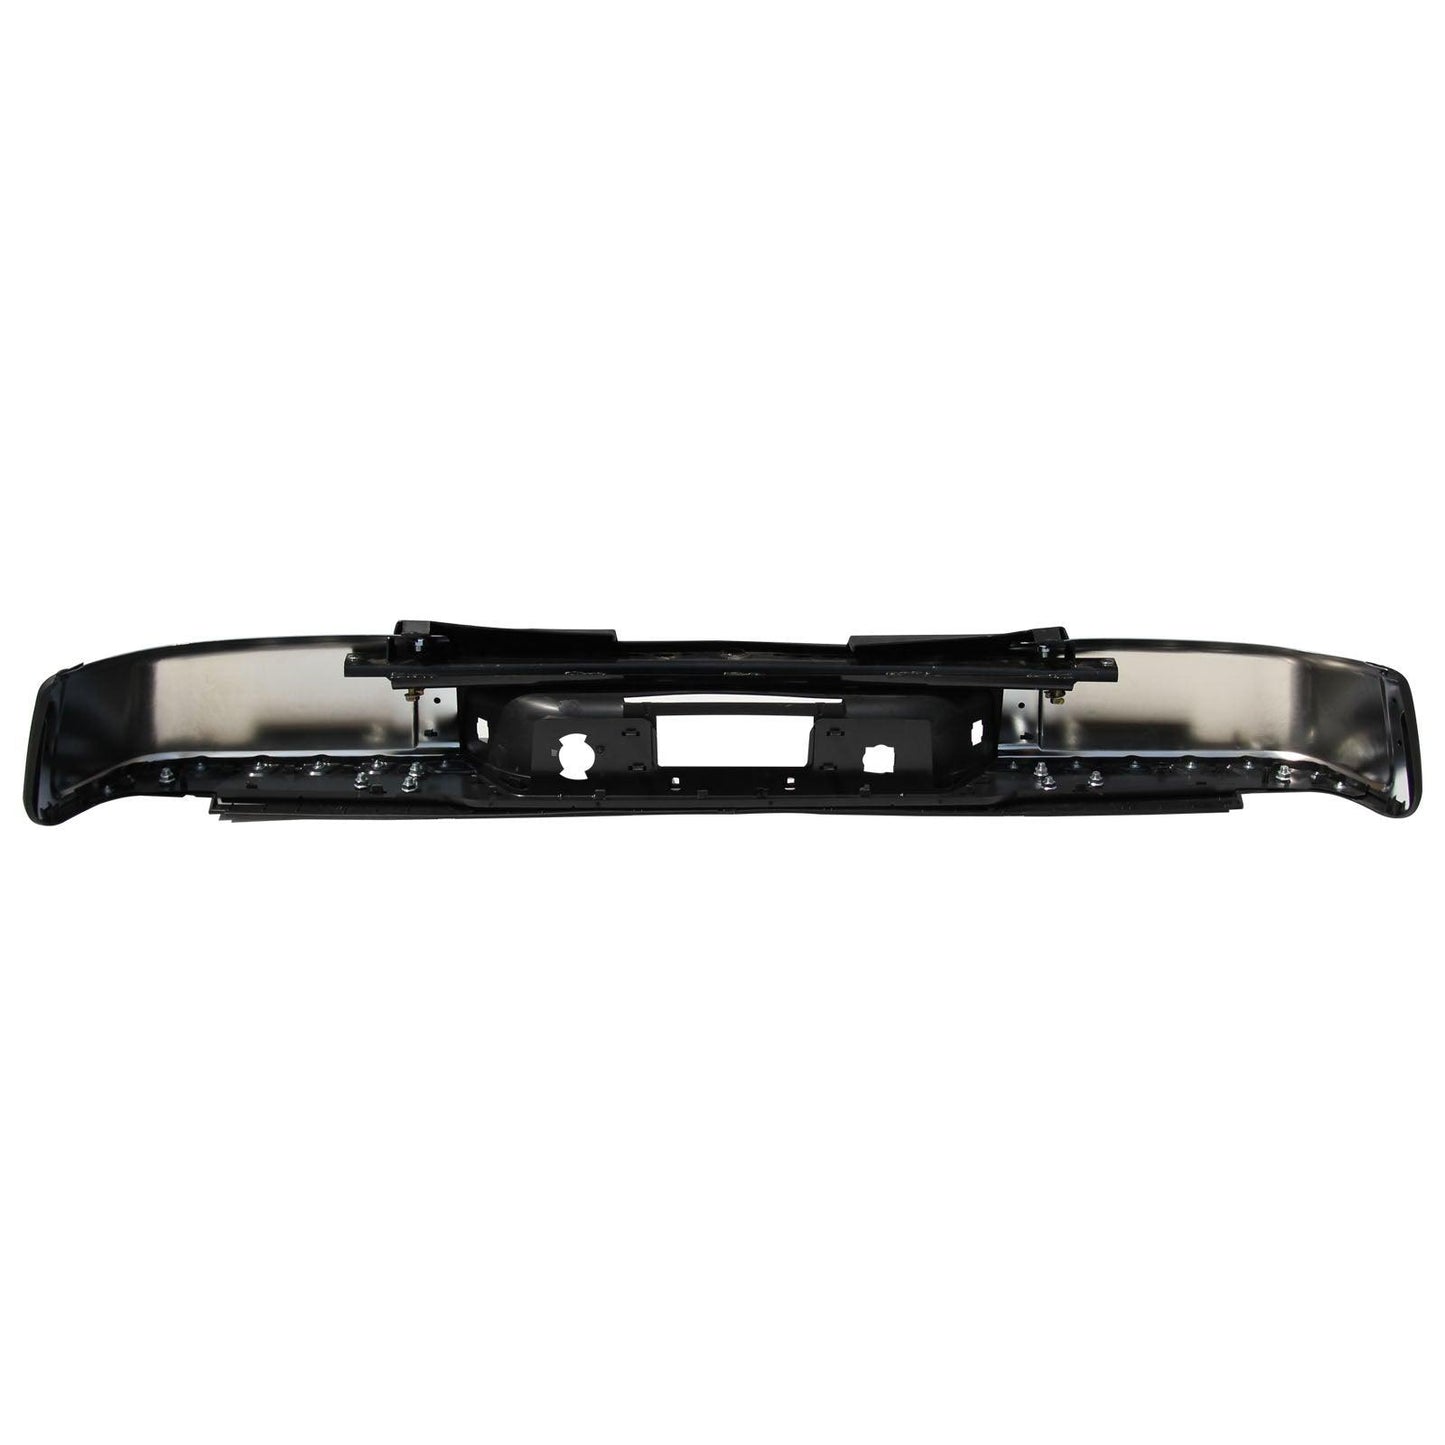 Steel Complete Chrome Rear Bumper For 2007 2008 2009 2010 2011 2012 2013 Chevy Silverado Gmc Sierra 1500 (Fits: Silverado 1500) Without Hole - Goodmatchup